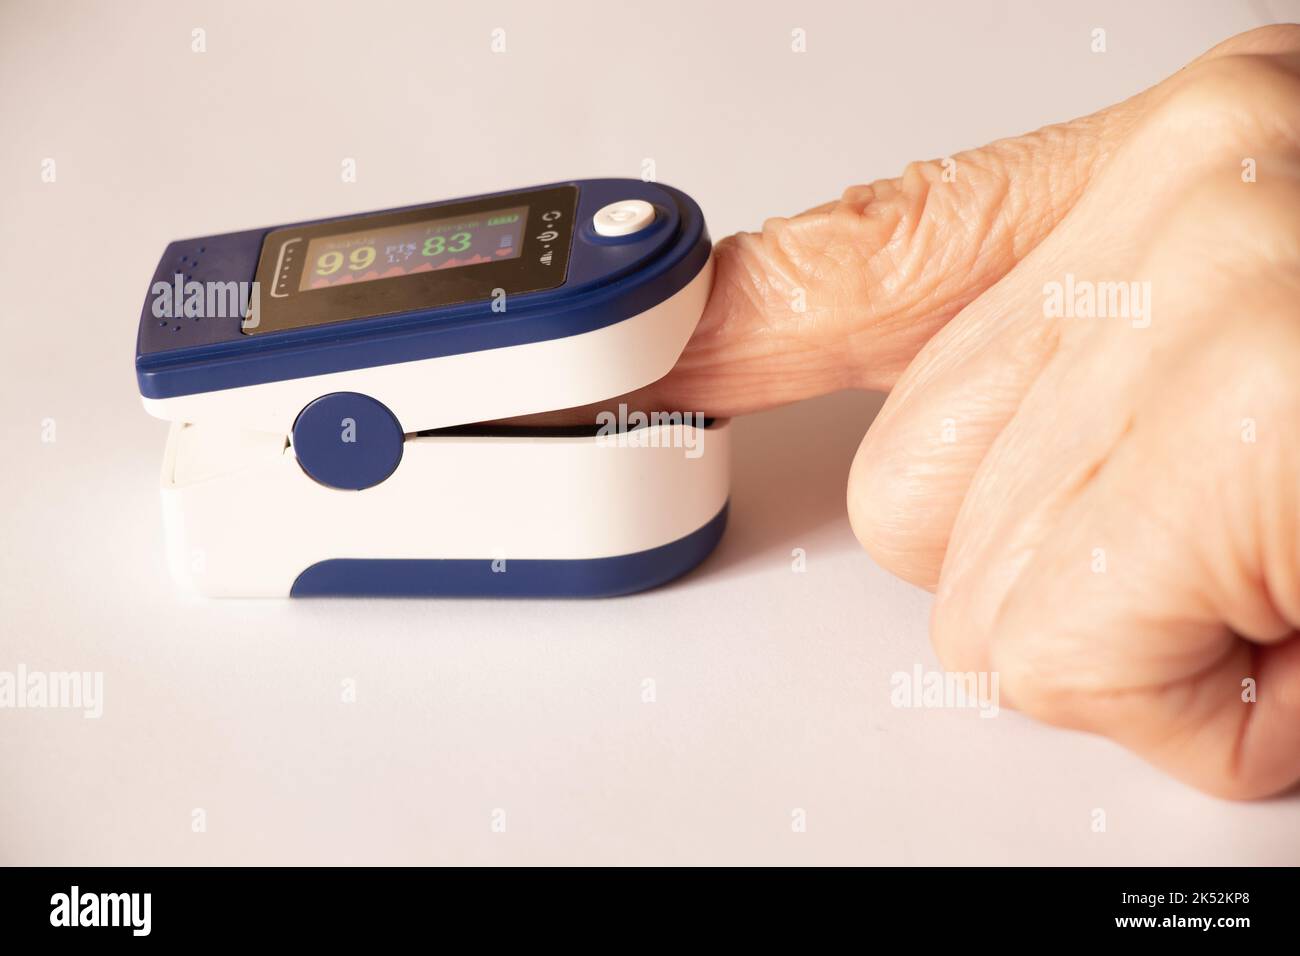 https://c8.alamy.com/comp/2K52KP8/pulse-oximeter-on-the-finger-of-a-woman-on-an-isolated-background-measure-the-level-of-oxygen-in-the-blood-oxometer-2K52KP8.jpg